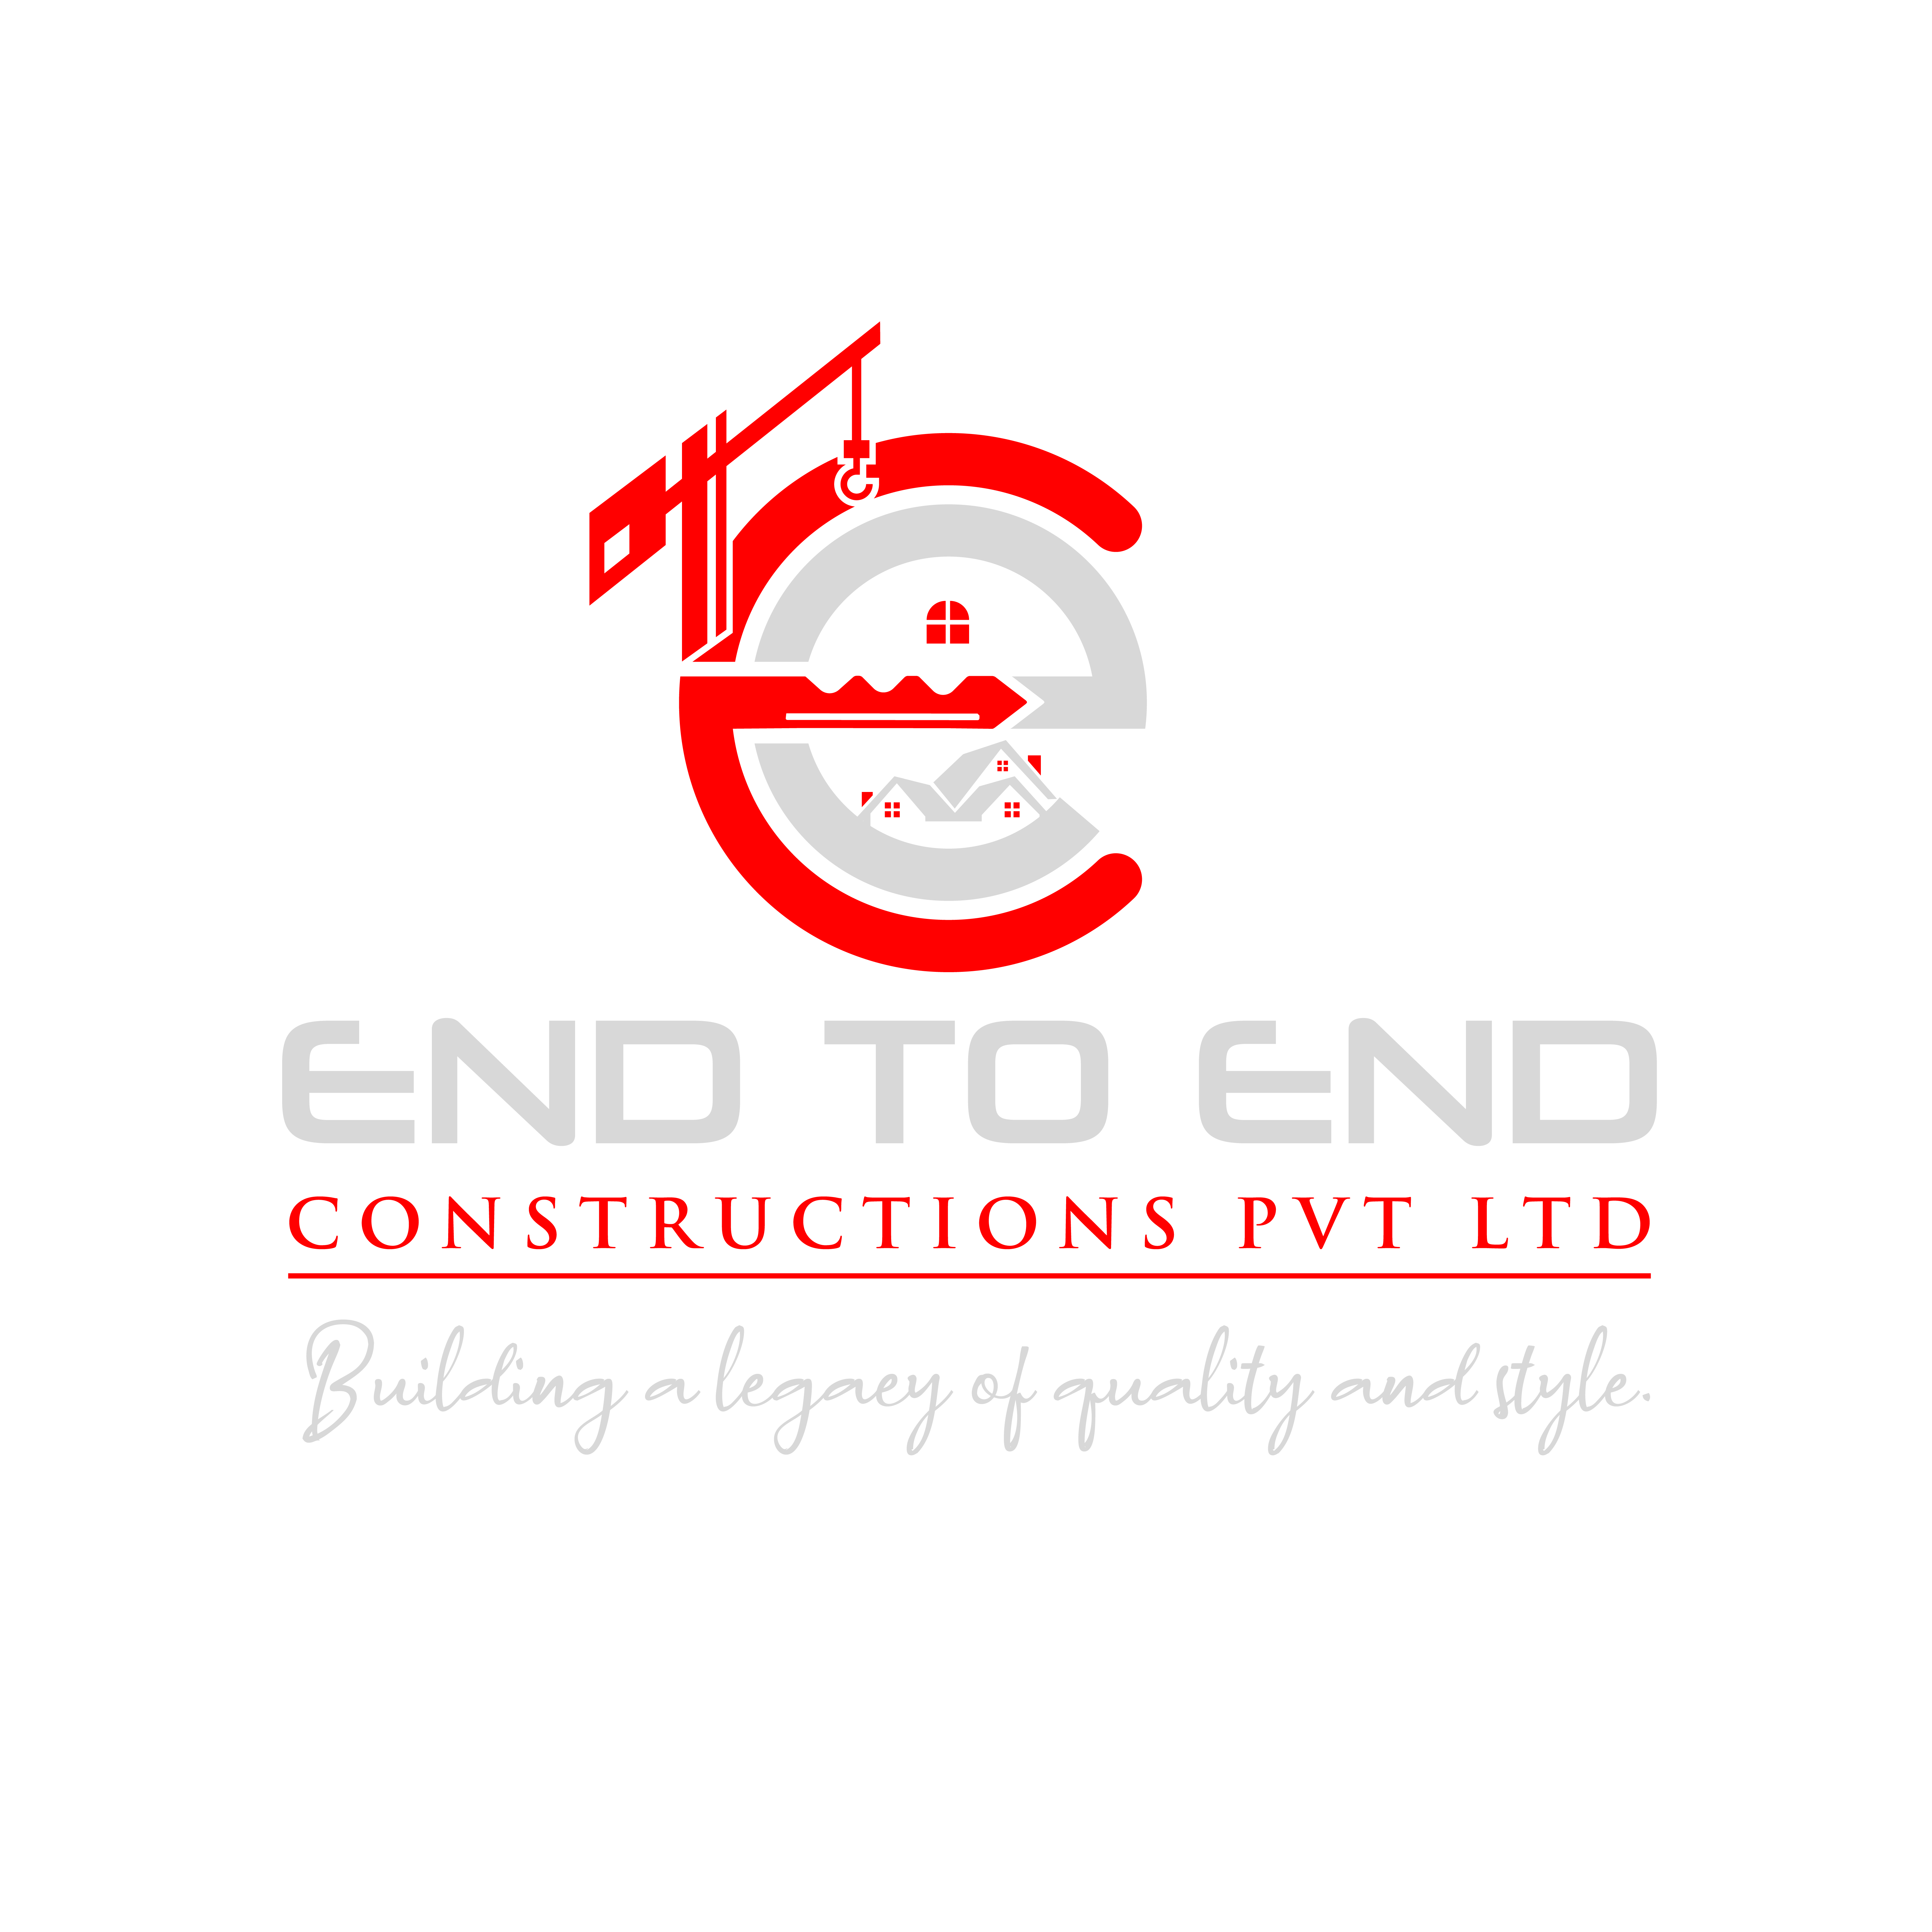 End to End Constructions Pvt. Ltd.